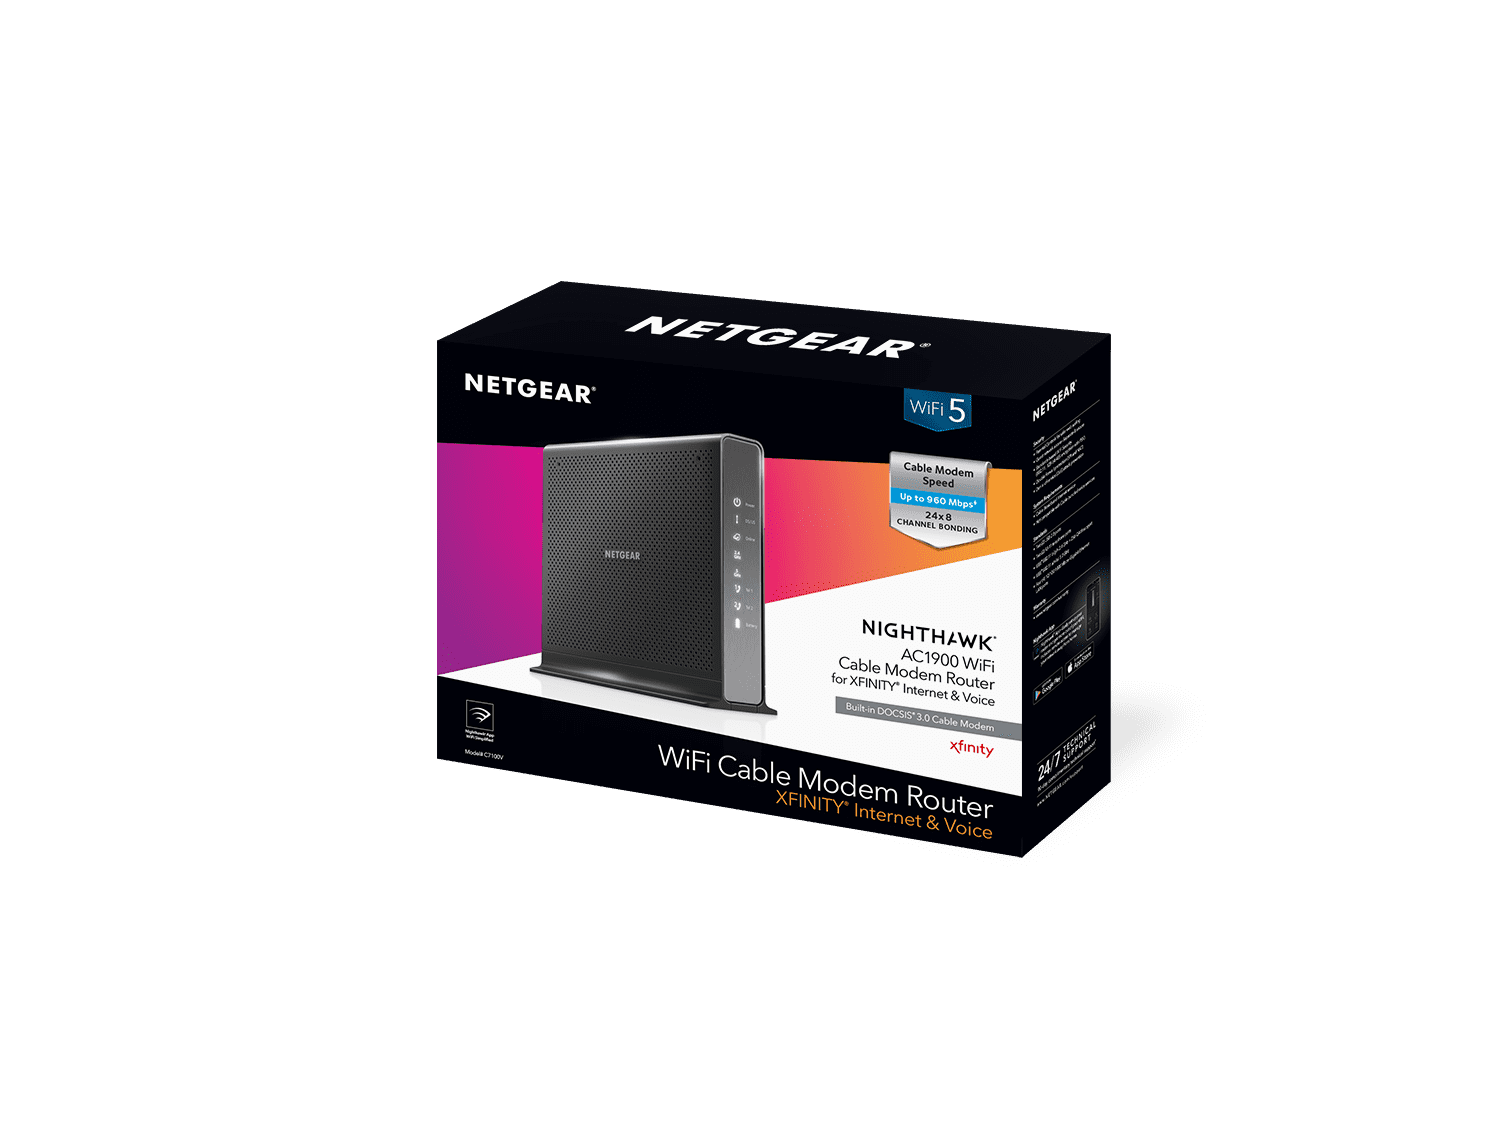 Ideal for Xfinity Internet and Voice services 24x8 Certified Refurbished C7100V NETGEAR Nighthawk AC1900 DOCSIS 3.0 WiFi Cable Modem Router Combo For XFINITY Internet & Voice 